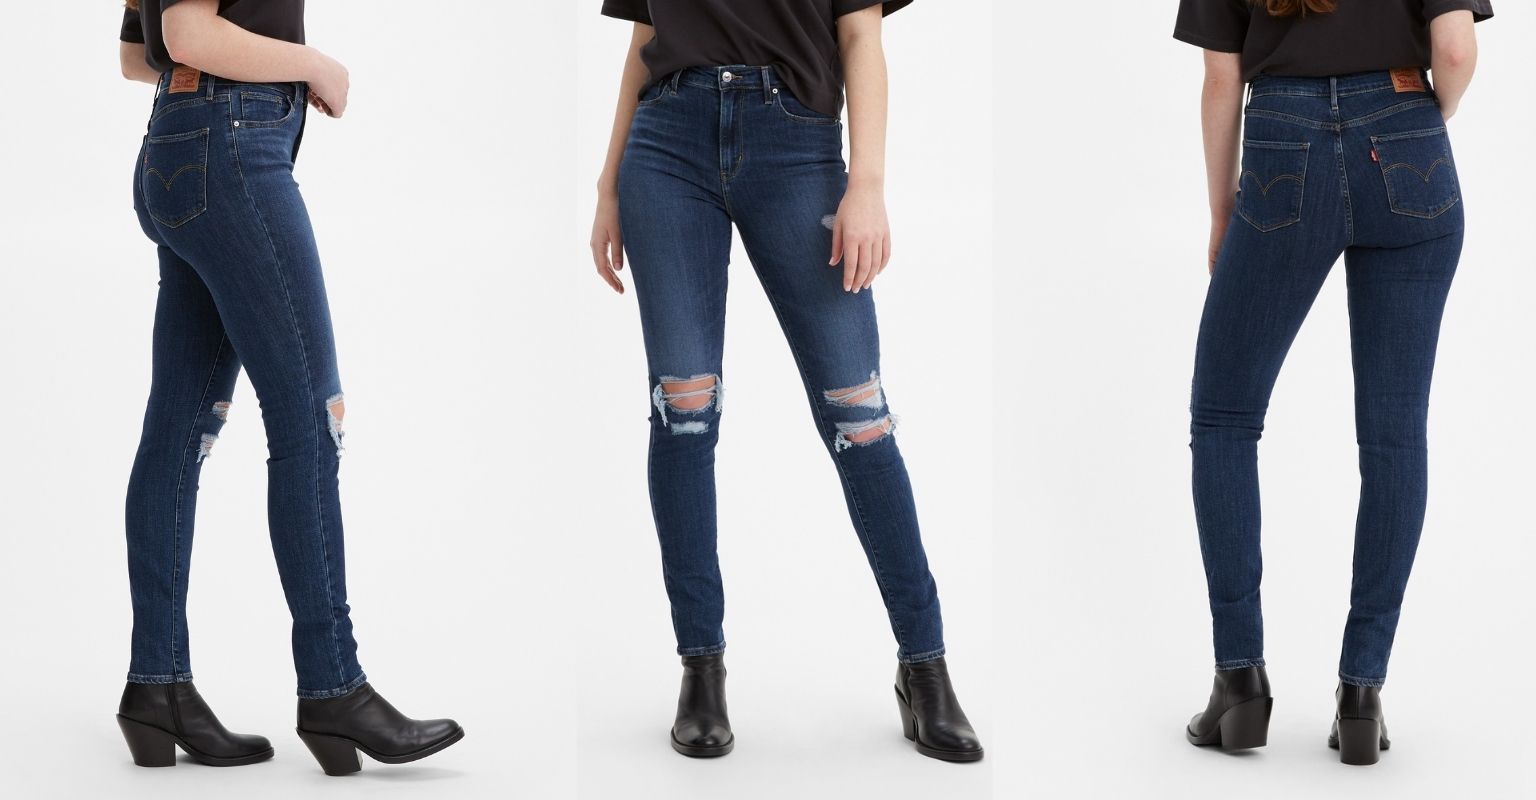 Women’s Jeans Fitting Guide